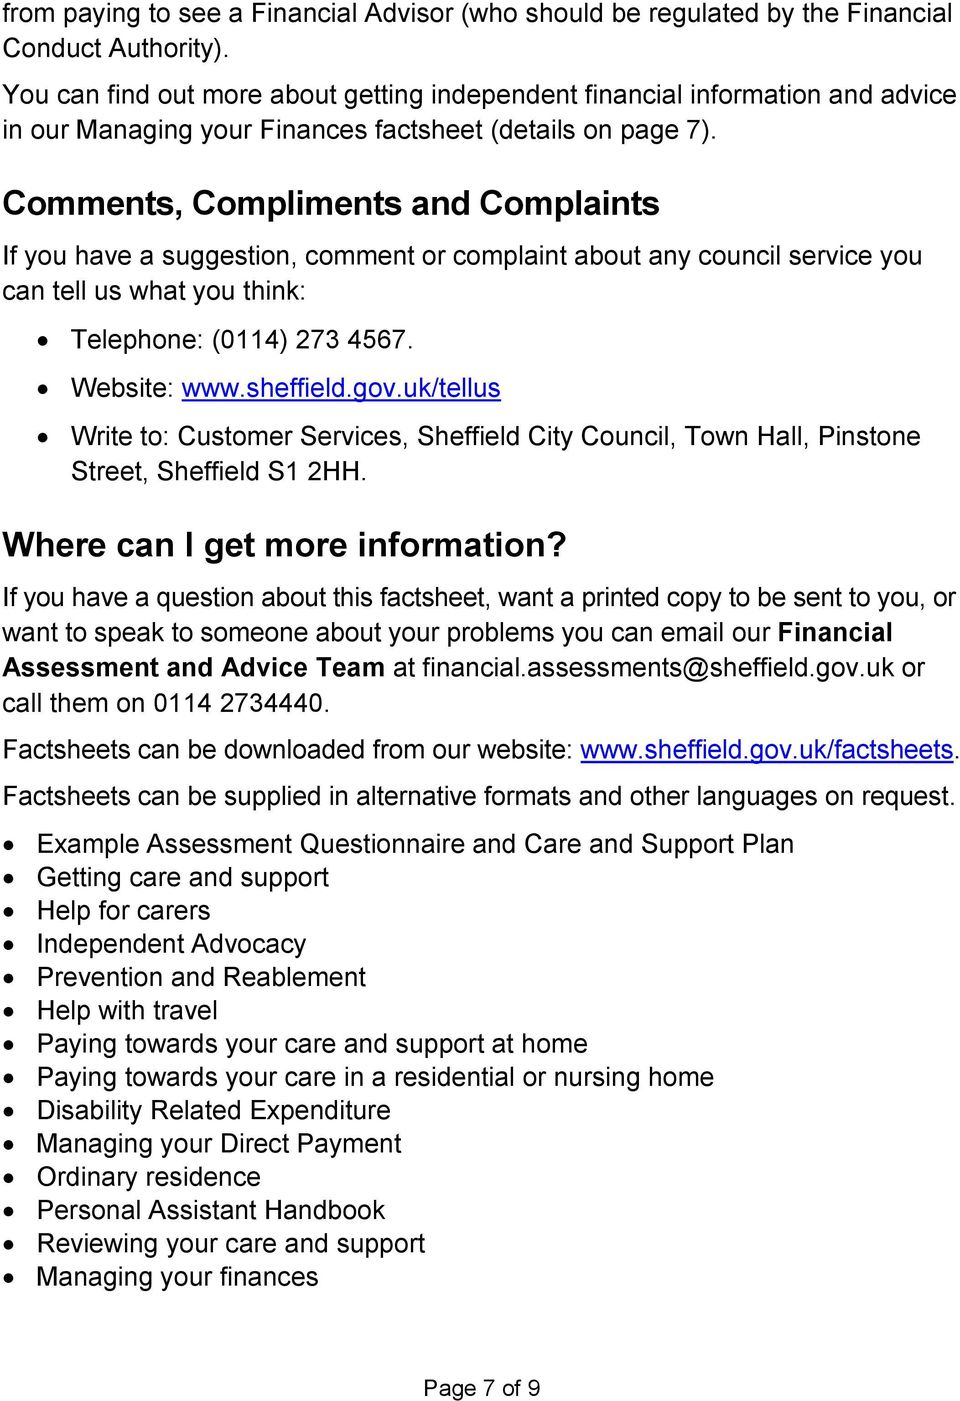 Comments, Compliments and Complaints If you have a suggestion, comment or complaint about any council service you can tell us what you think: Telephone: (0114) 273 4567. Website: www.sheffield.gov.